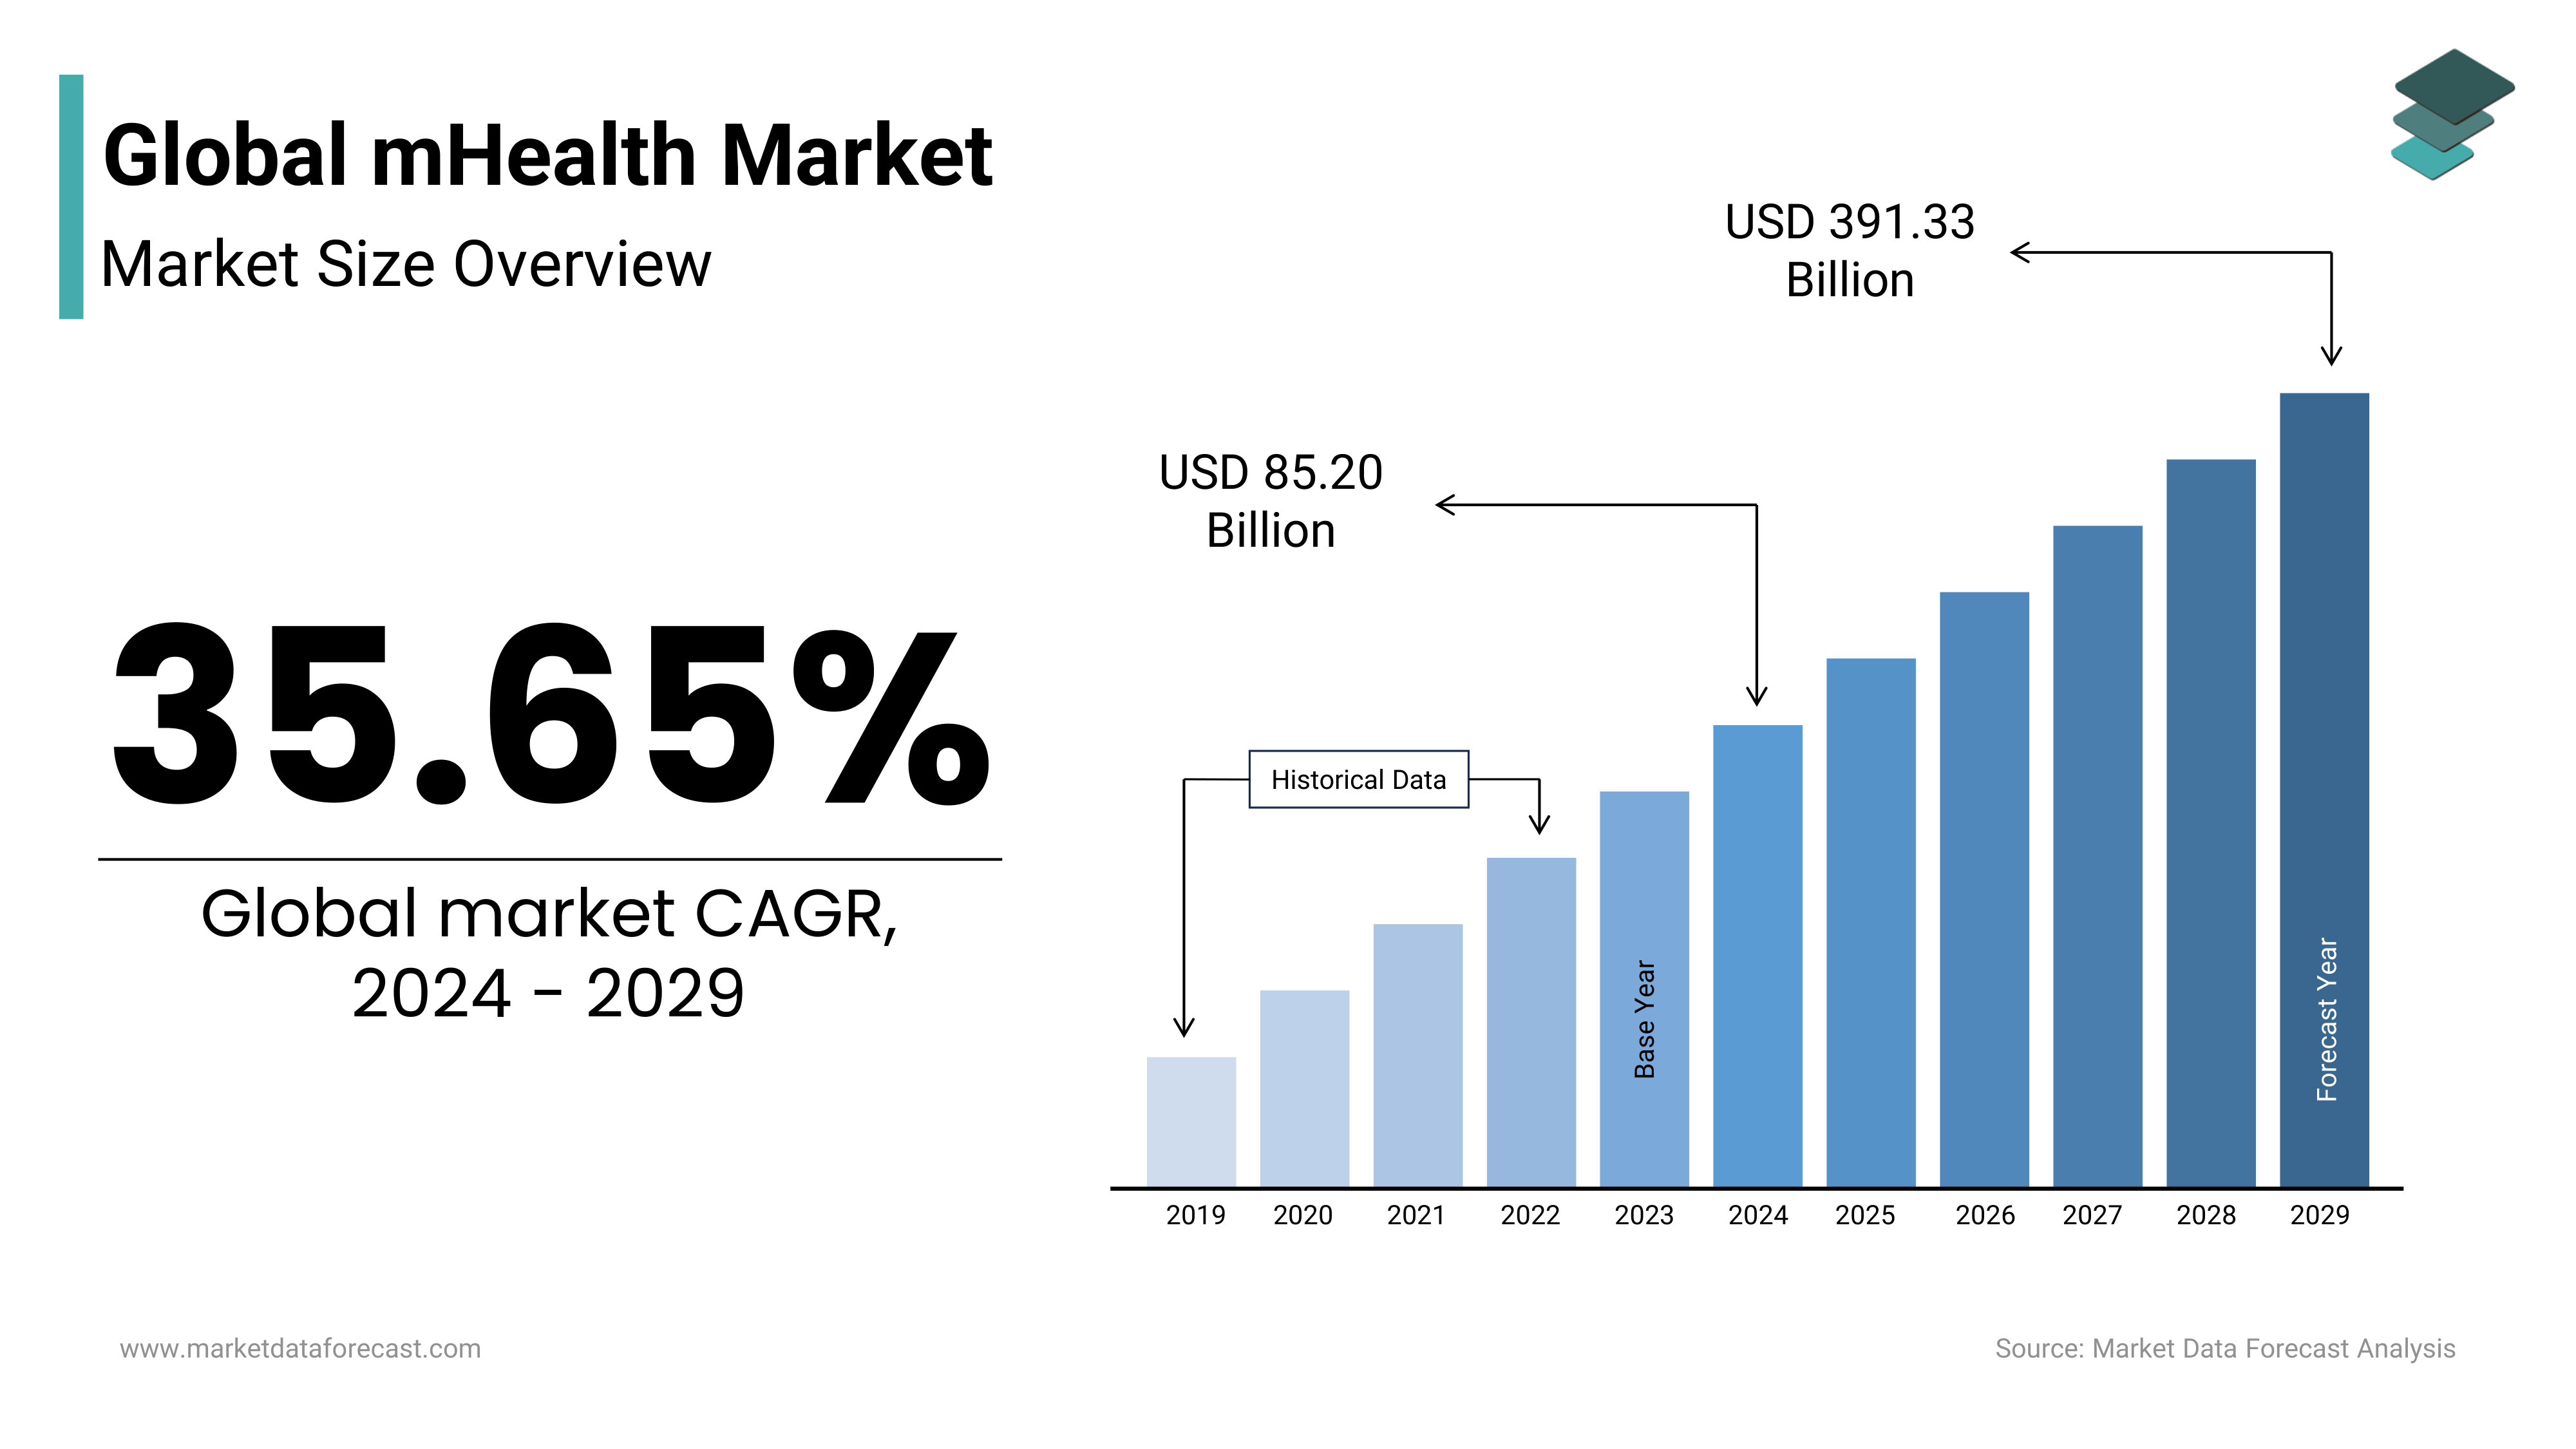 The global mhealth market size is expected to reach USD 391.33 billion by 2029